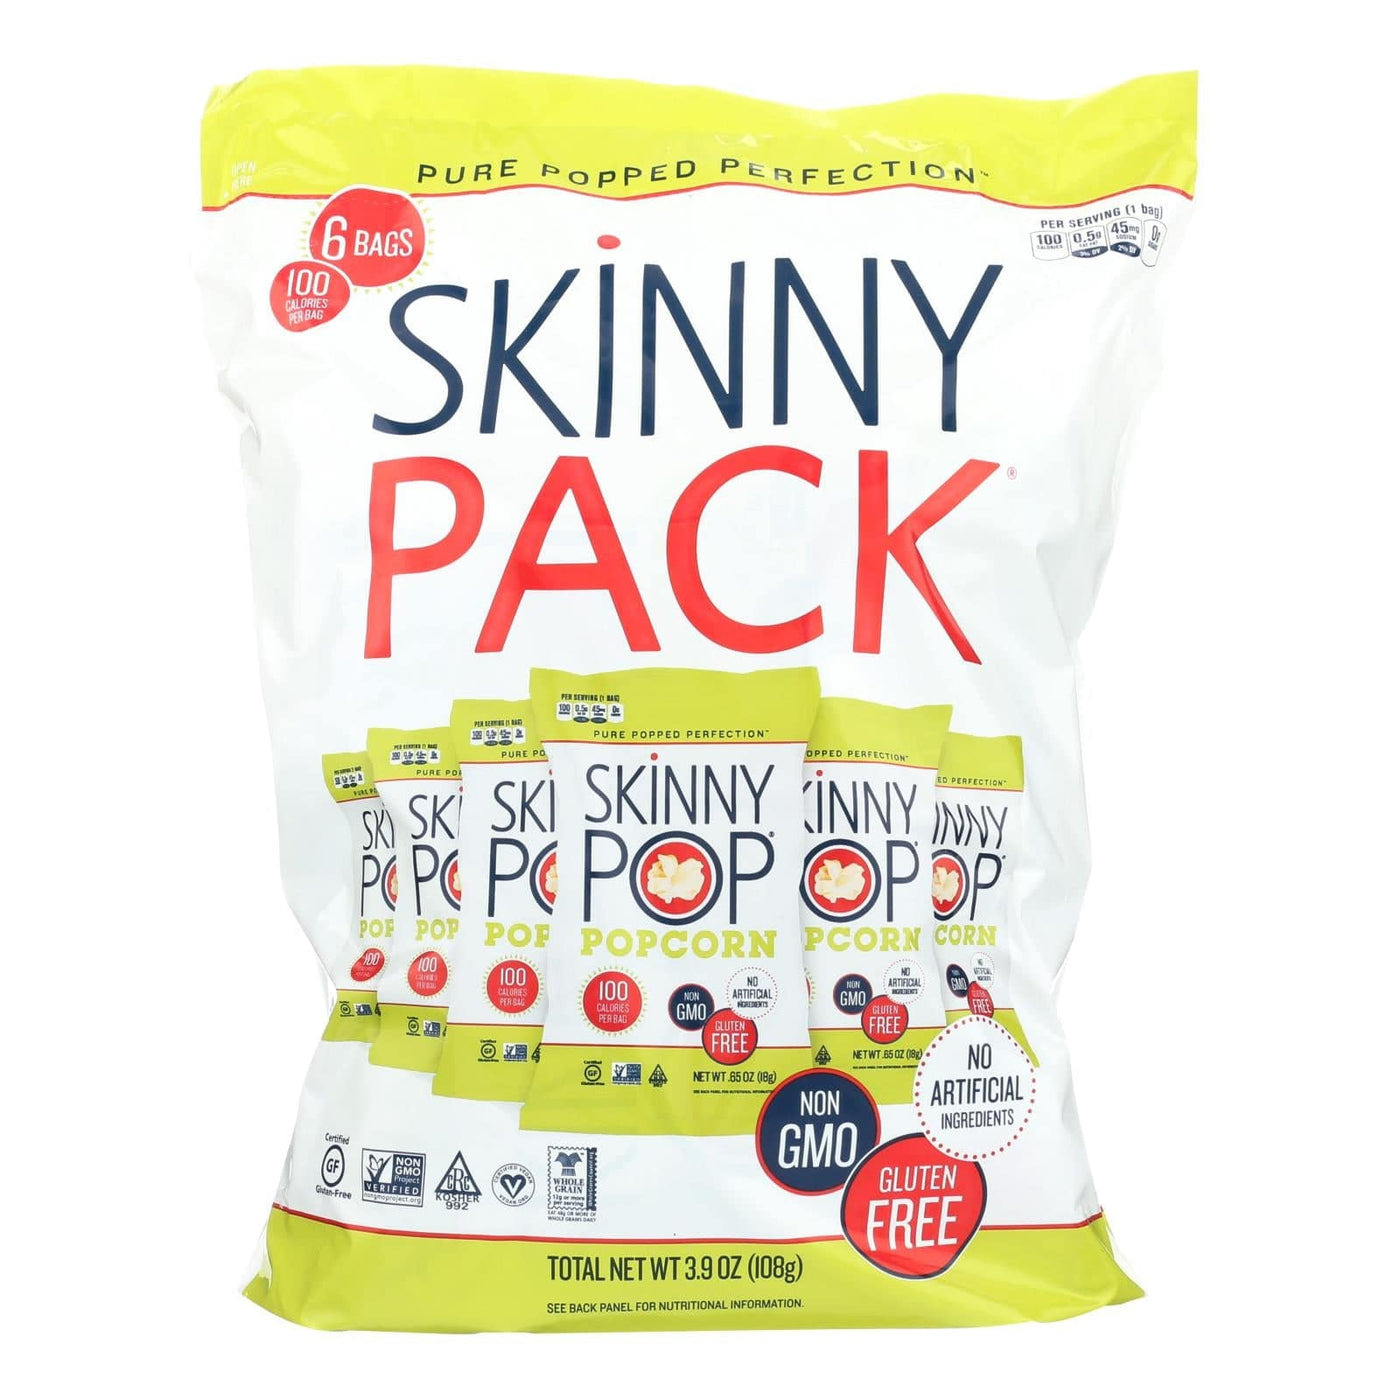 Buy Skinnypop Popcorn 100 Calorie Popcorn Bags - Case Of 10 - 0.65 Oz.  at OnlyNaturals.us